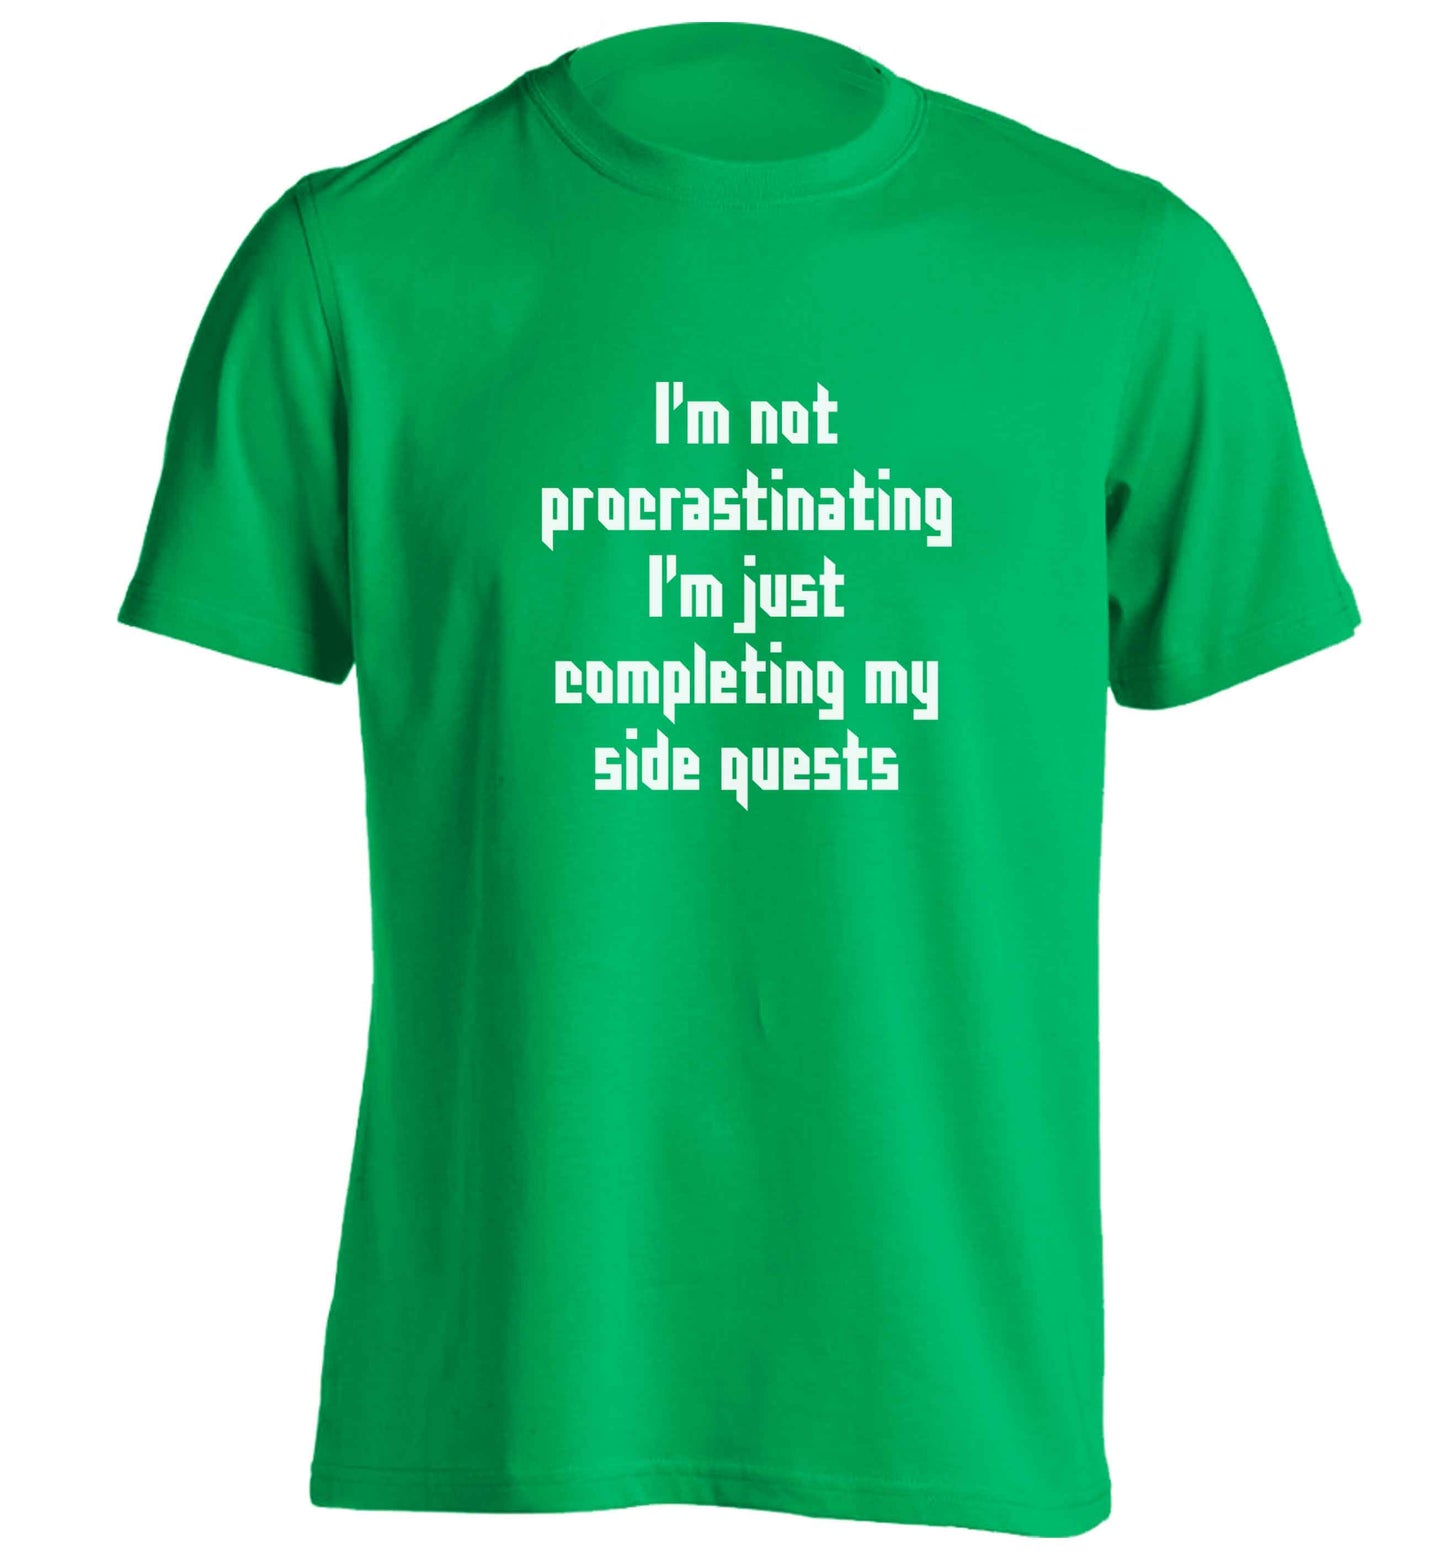 I'm not procrastinating I'm just completing my side quests adults unisex green Tshirt 2XL